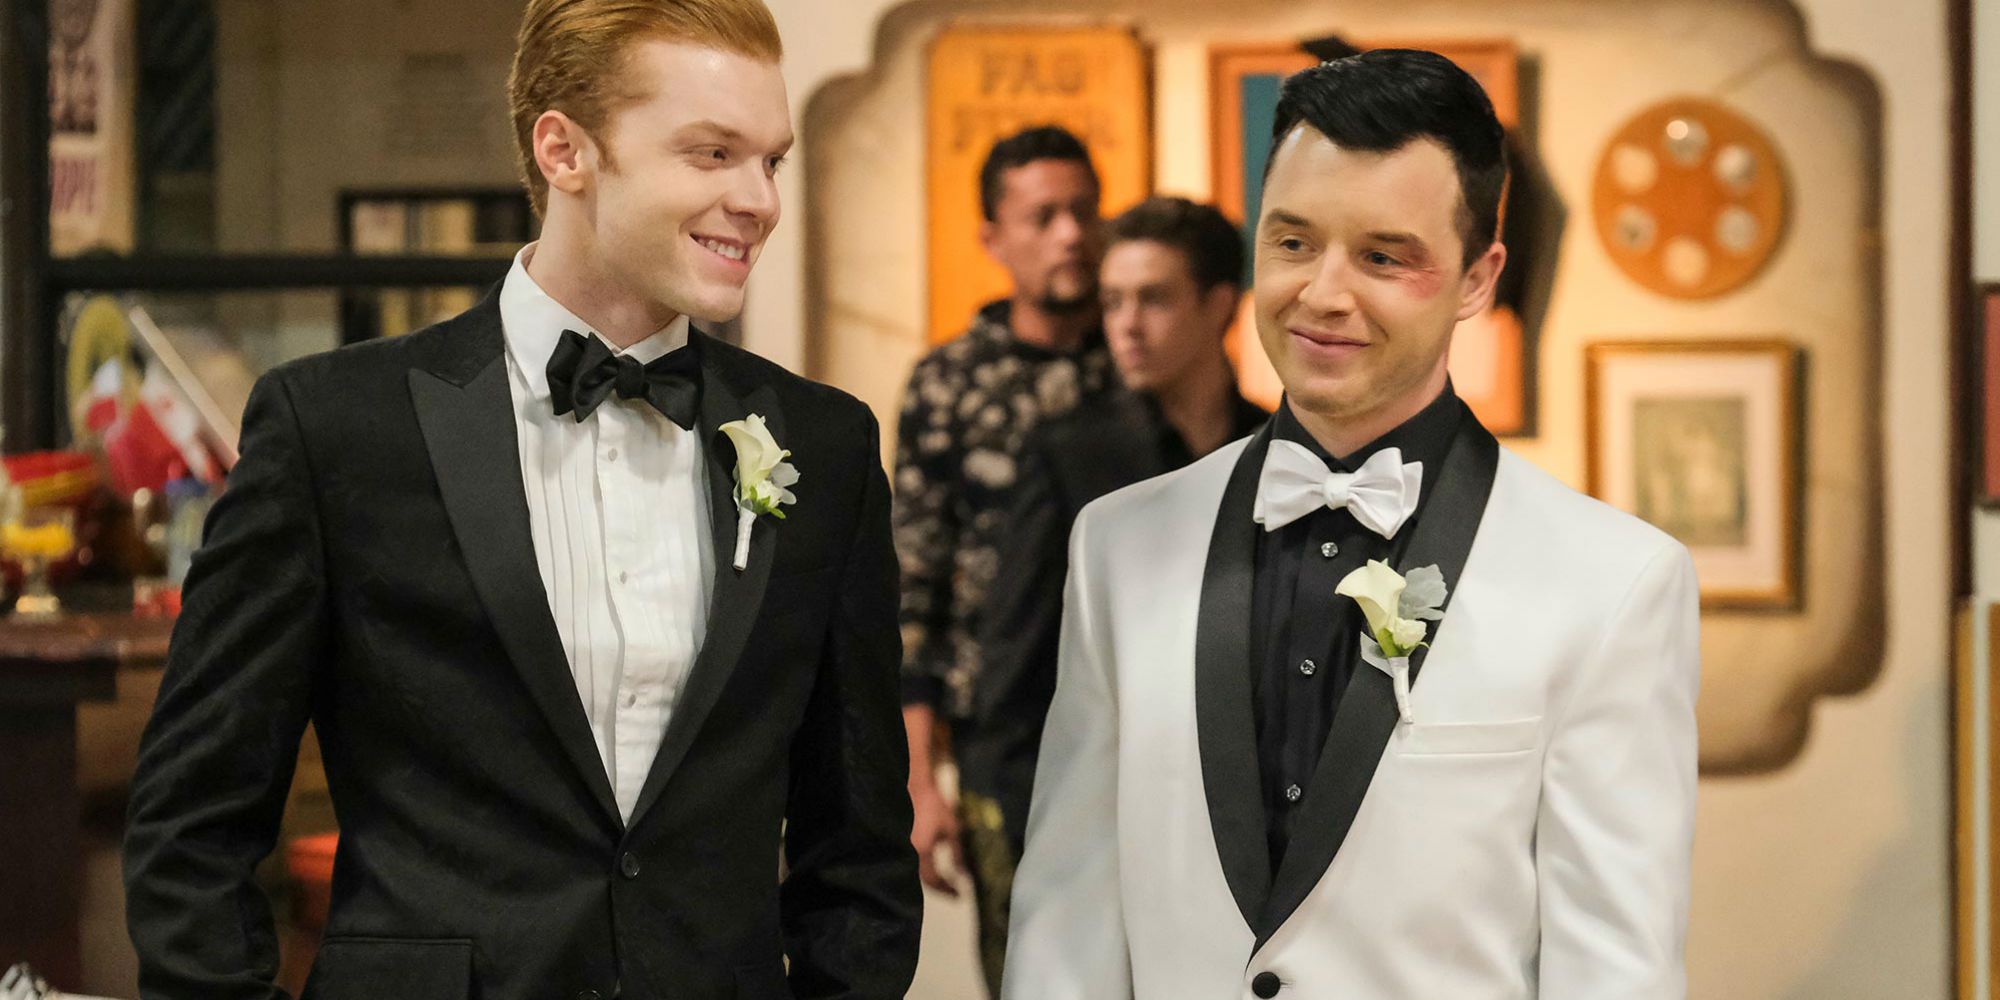 Ian and Mickey at their wedding on Shameless.